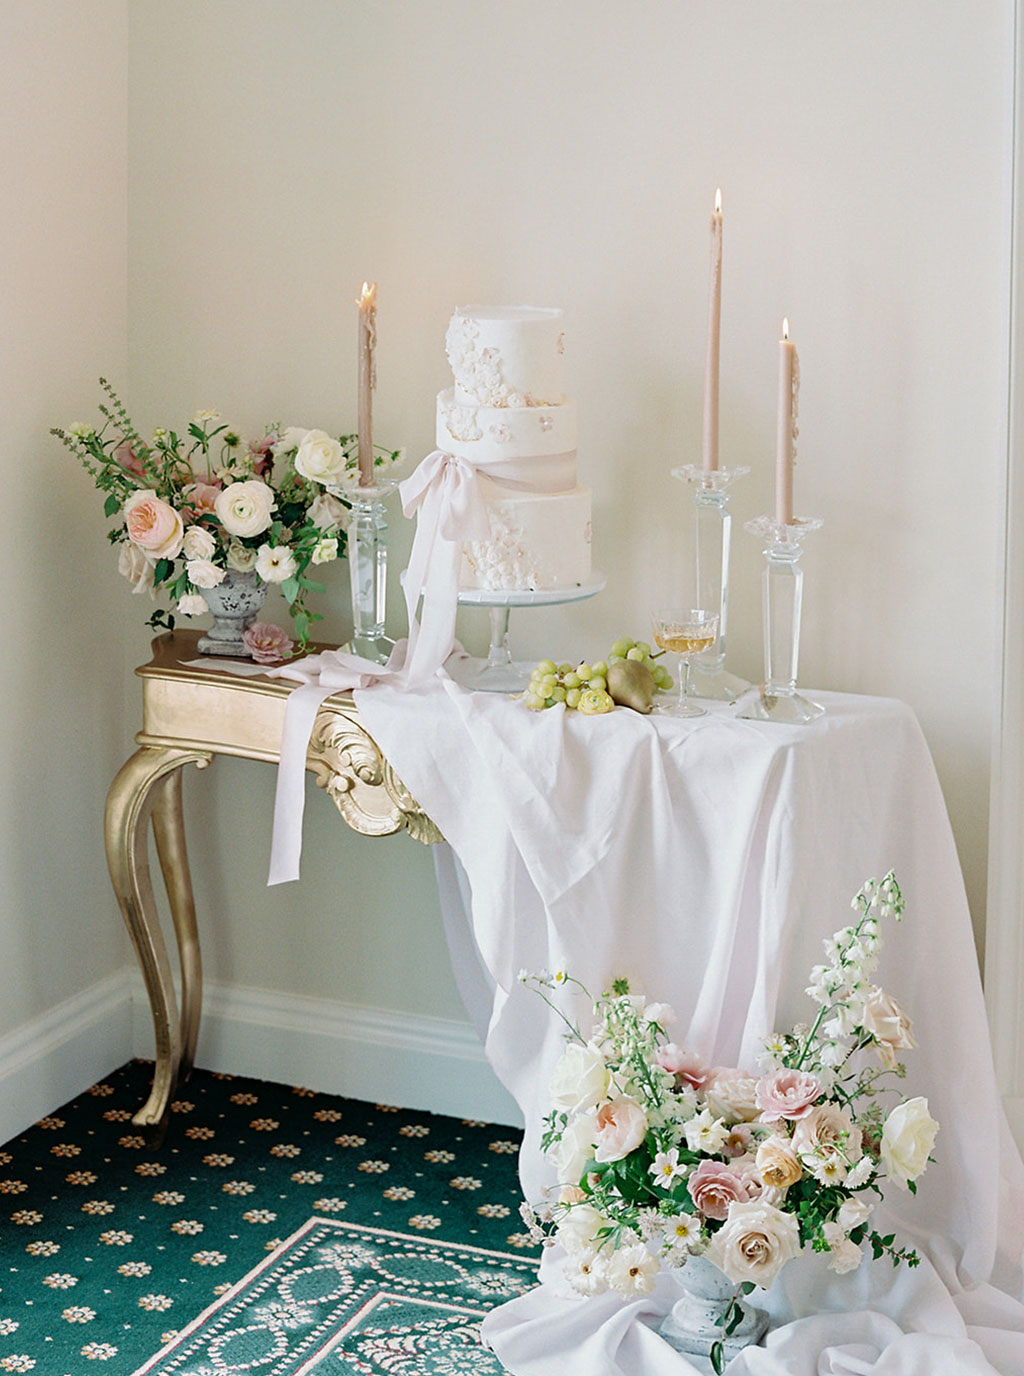 5 Incredible Wedding Cake Table Designs - Lustre Theory Styling + Design